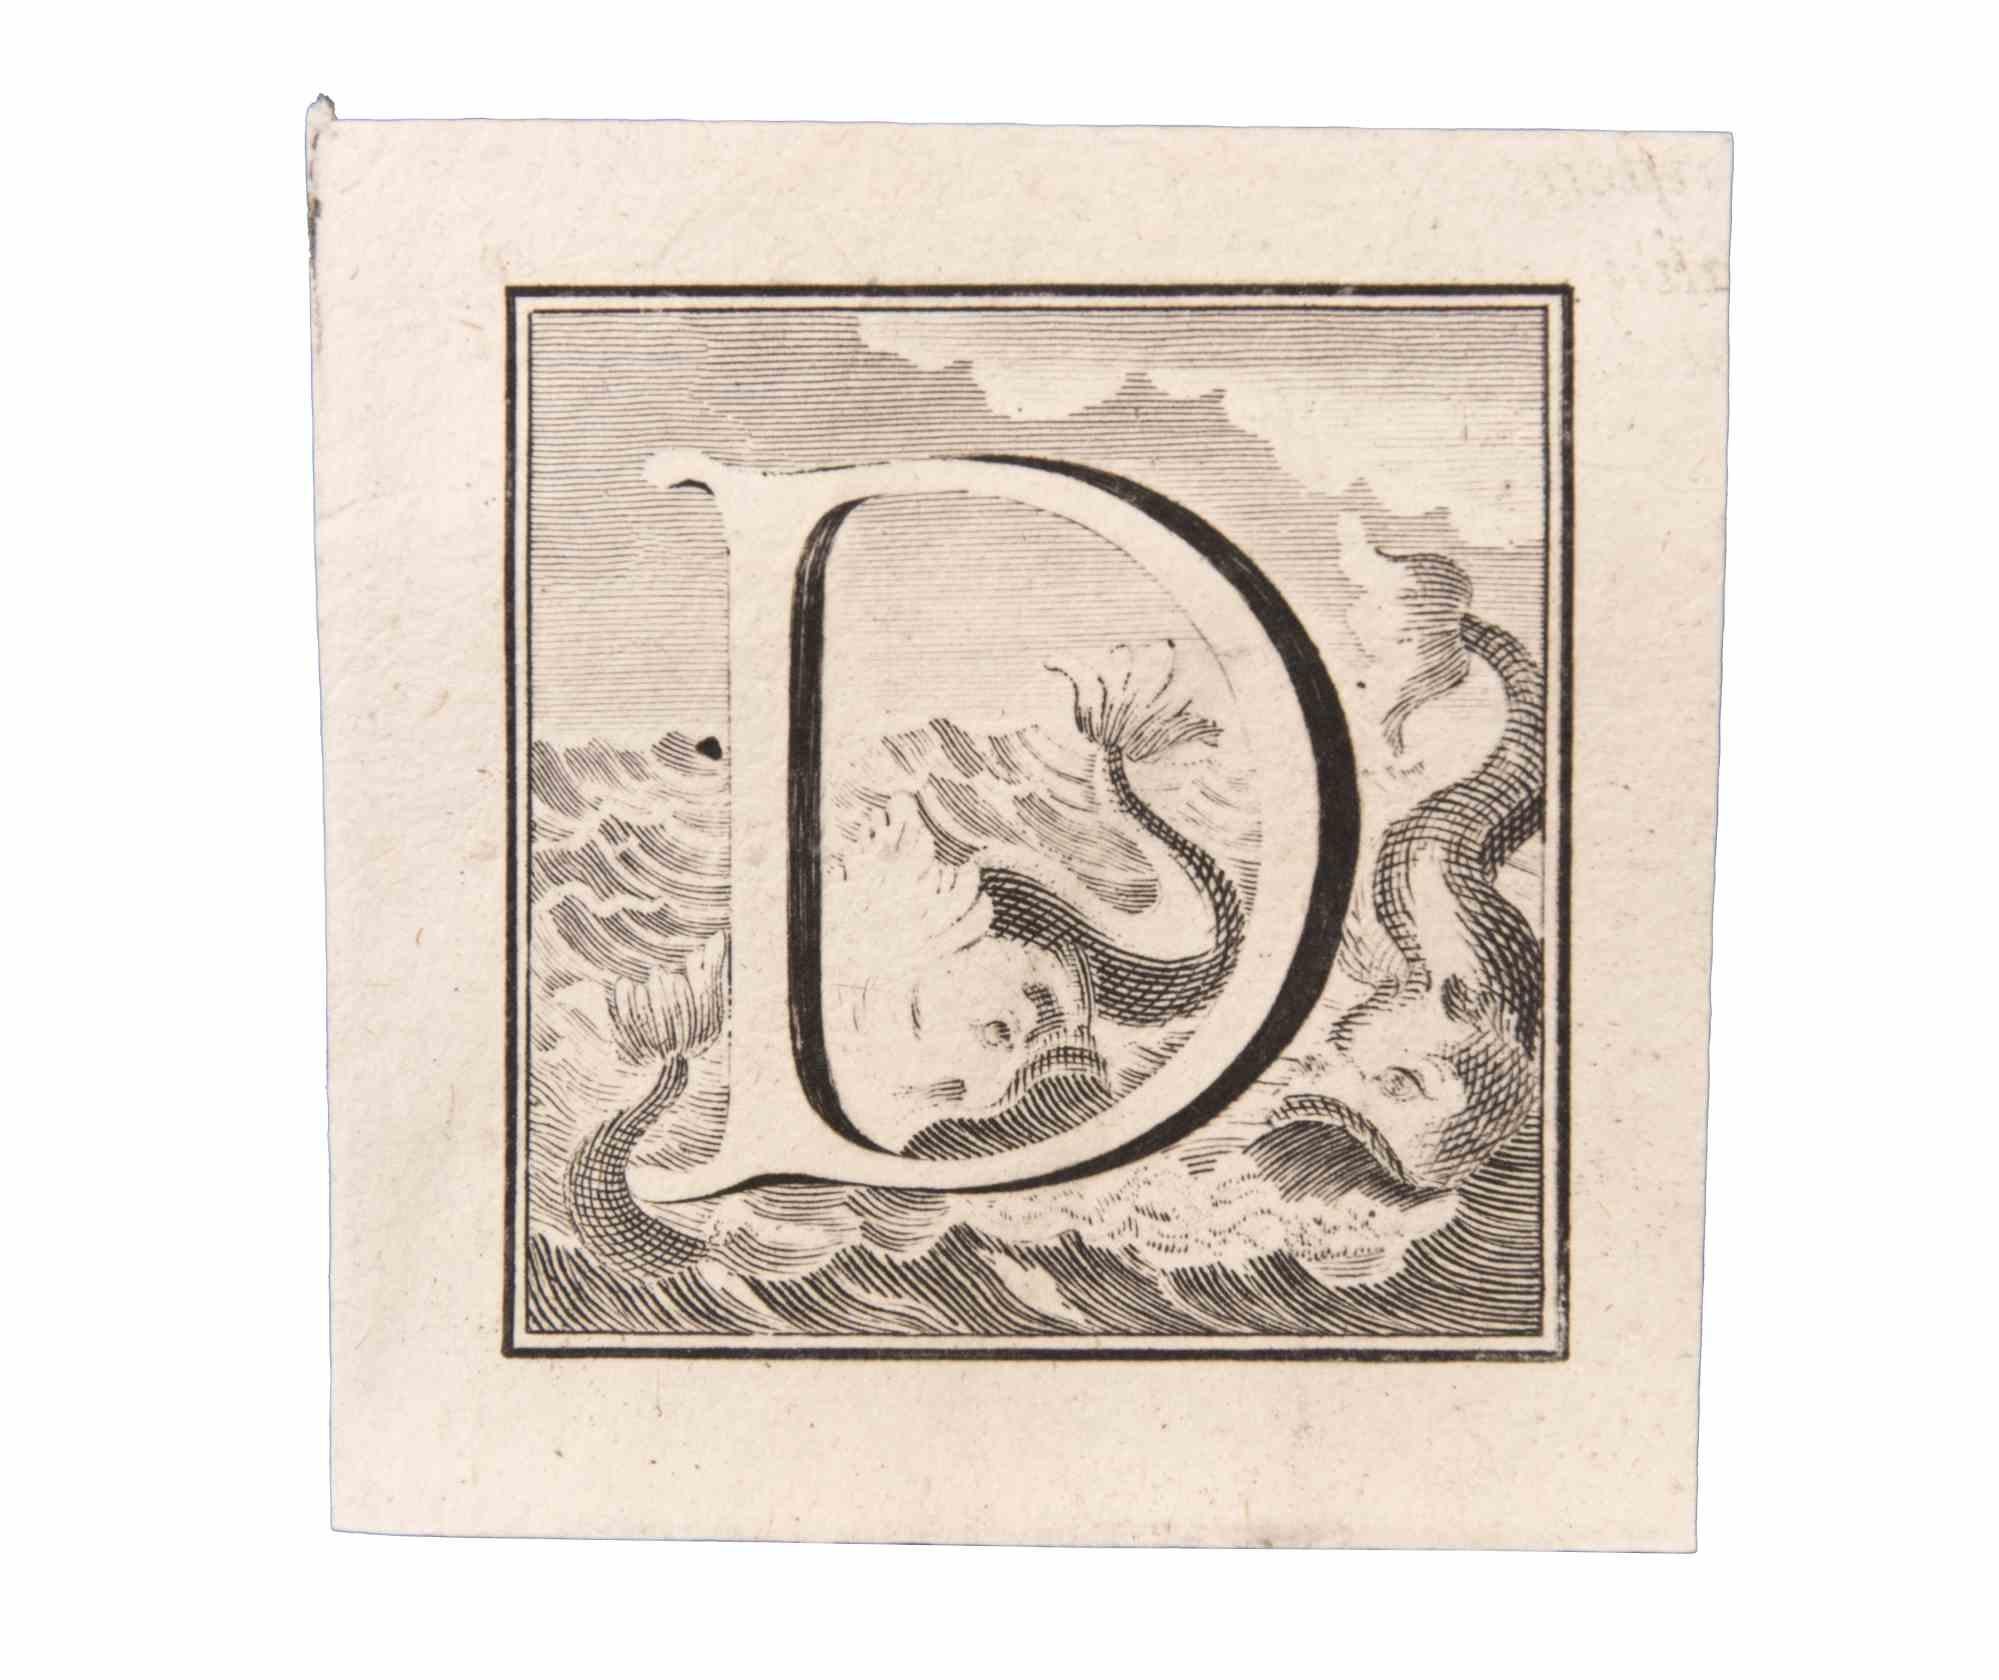 Letter D is an Etching realized by Luigi Vanvitelli artist of 18th century.

The etching belongs to the print suite “Antiquities of Herculaneum Exposed” (original title: “Le Antichità di Ercolano Esposte”), an eight-volume volume of engravings of